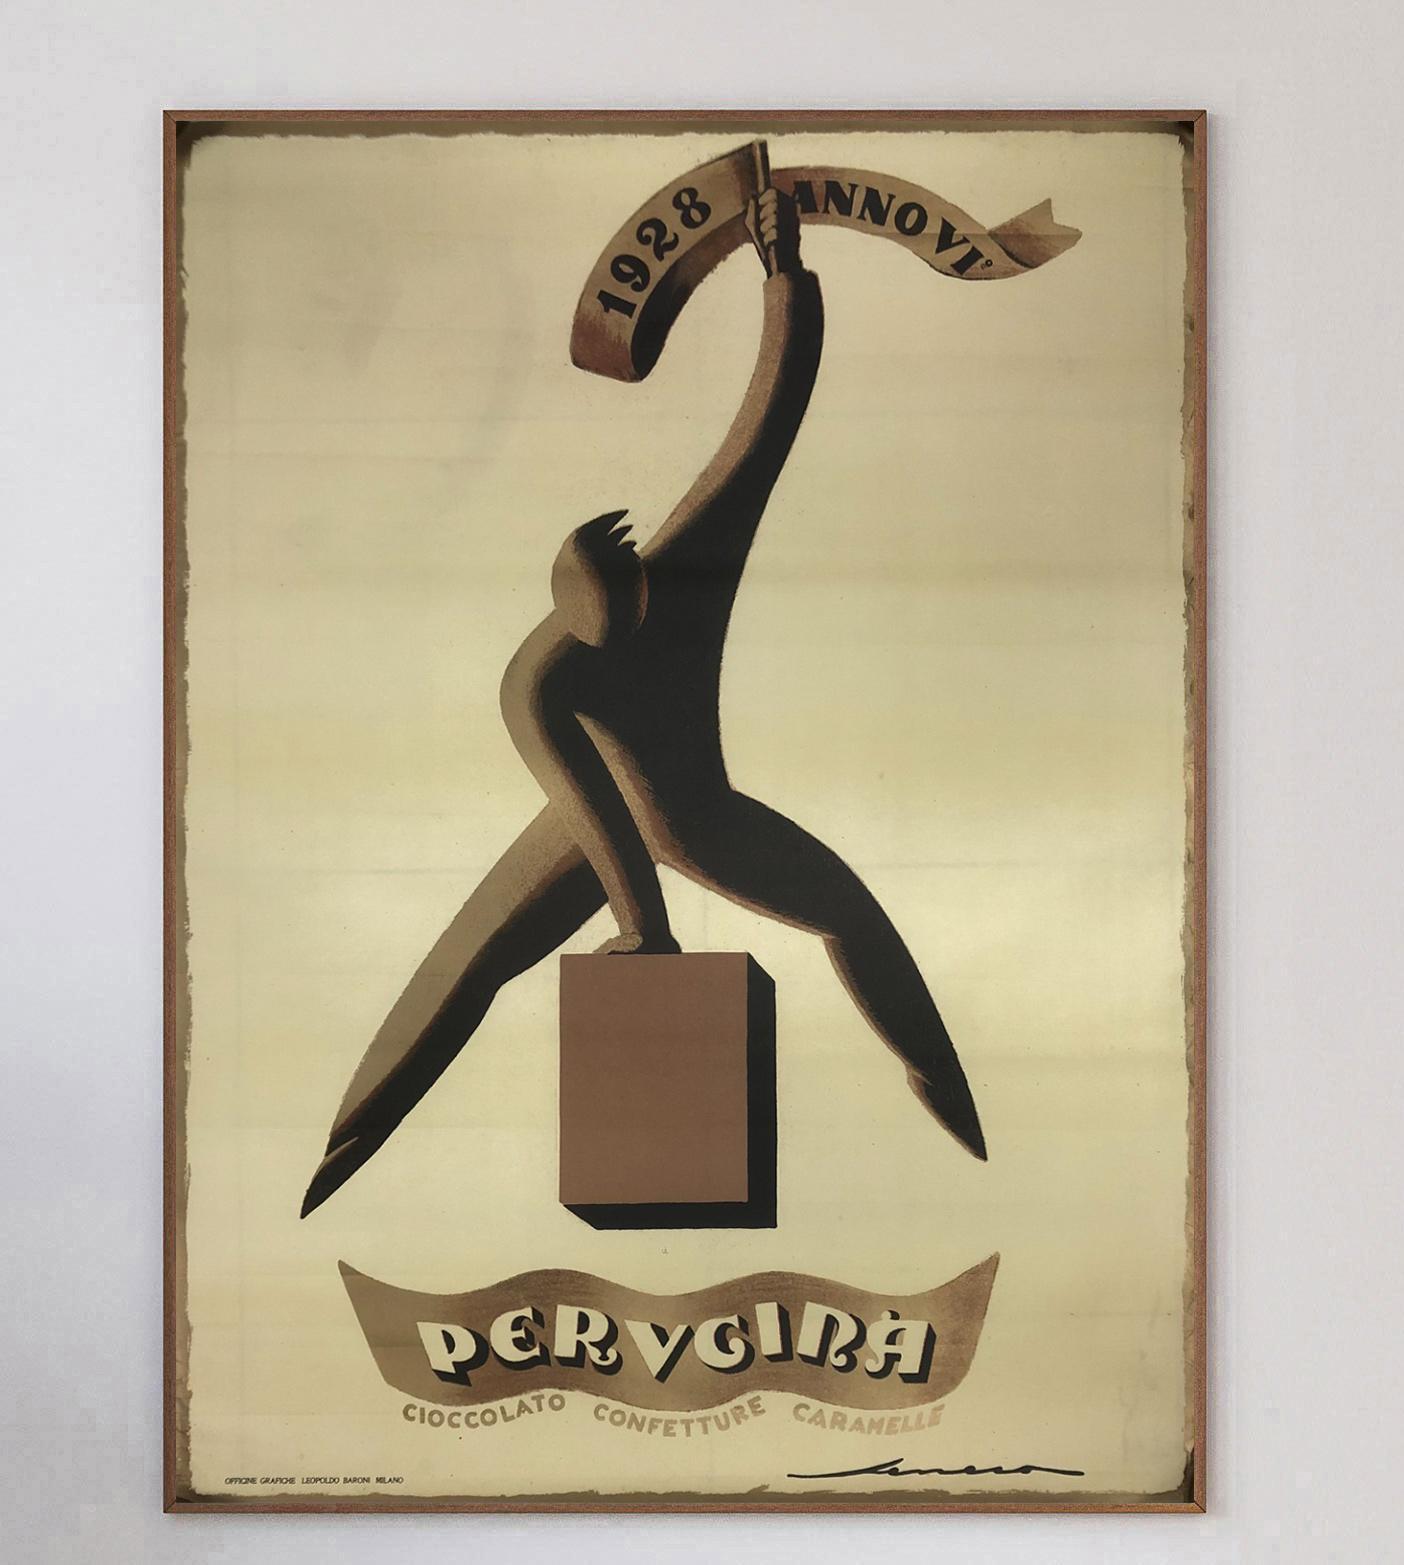 Founded in 1907 and named after the town in which it is based, Perugina is an Italian chocolate and confectionary company that continues to trade to this day.

This beautiful art deco design depicting a bent-over figure waving a flag reading 